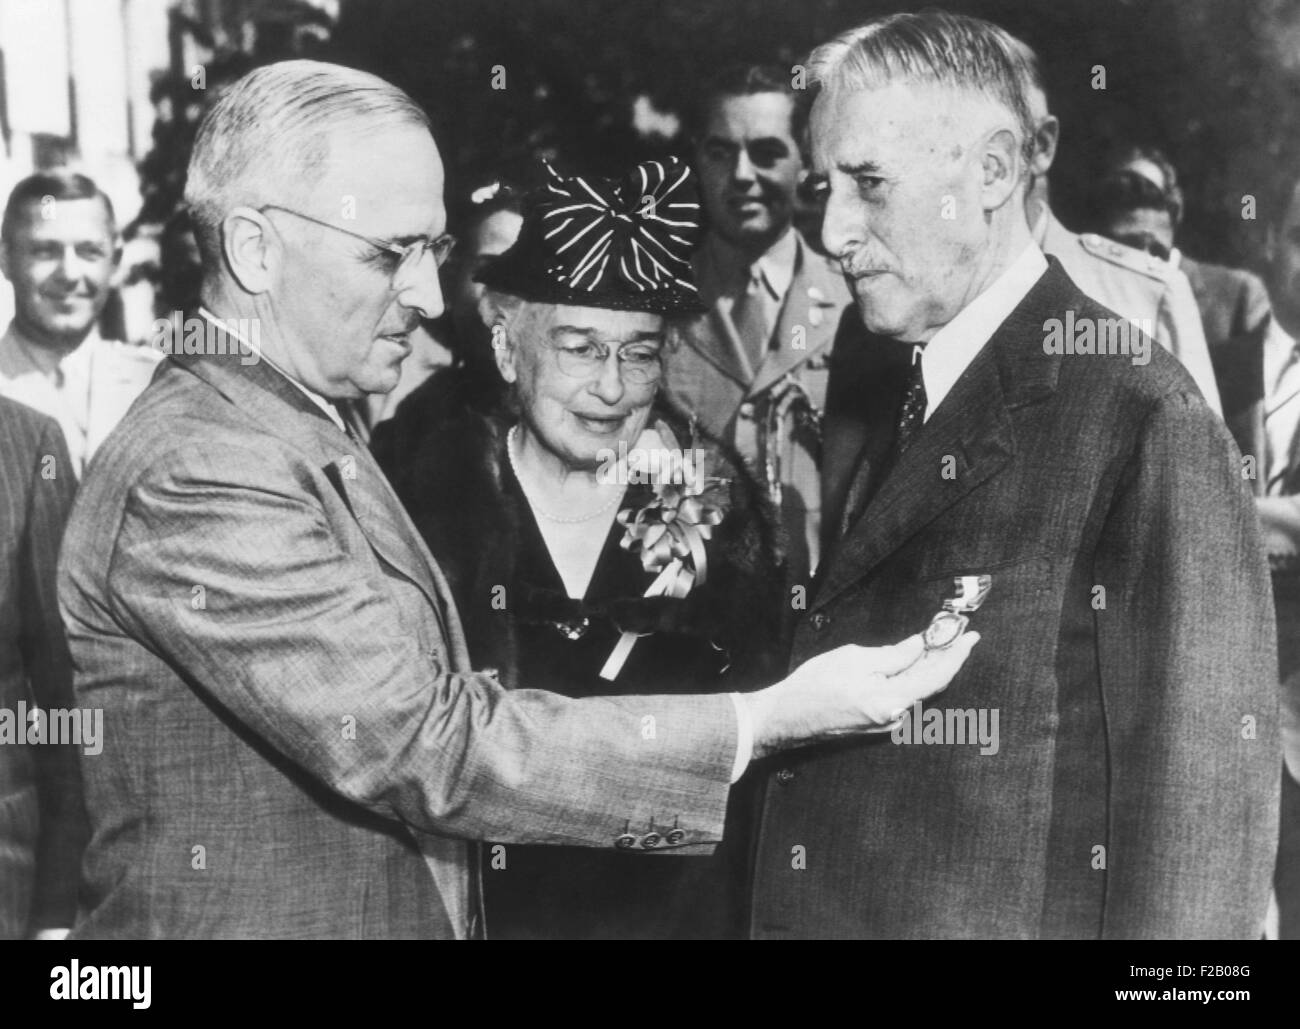 President Harry Truman awards Distinguished Service Medal retiring Secretary of War Henry Stimson. Sept. 21, 1945. The Republican statesman served in the Cabinets of four Presidents: William Taft, Herbert Hoover, Franklin Roosevelt, and Harry Truman. (CSU 2015 9 1154) Stock Photo